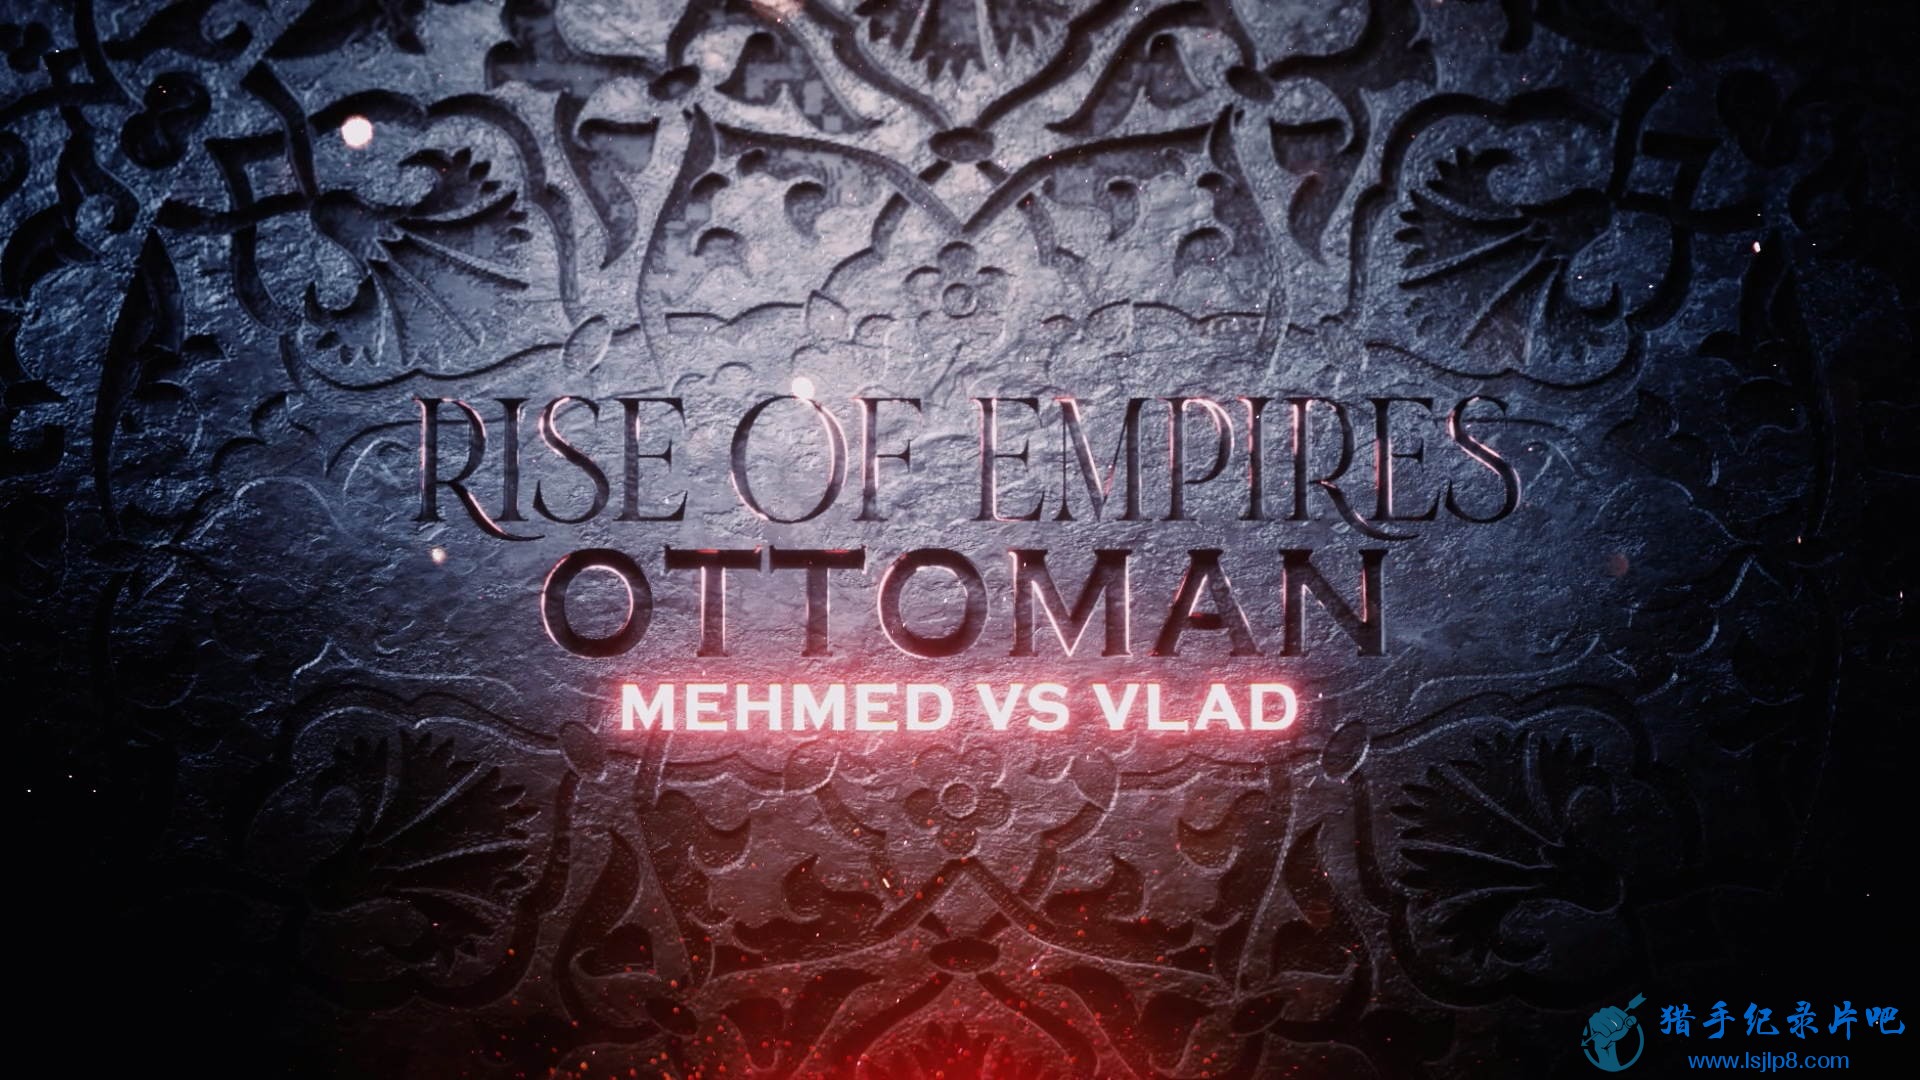 Rise.of.Empires.Ottoman.S02E01.House.of.War.1080p.NF.WEB-DL.DDP5.1.H.264-SMURF.jpg